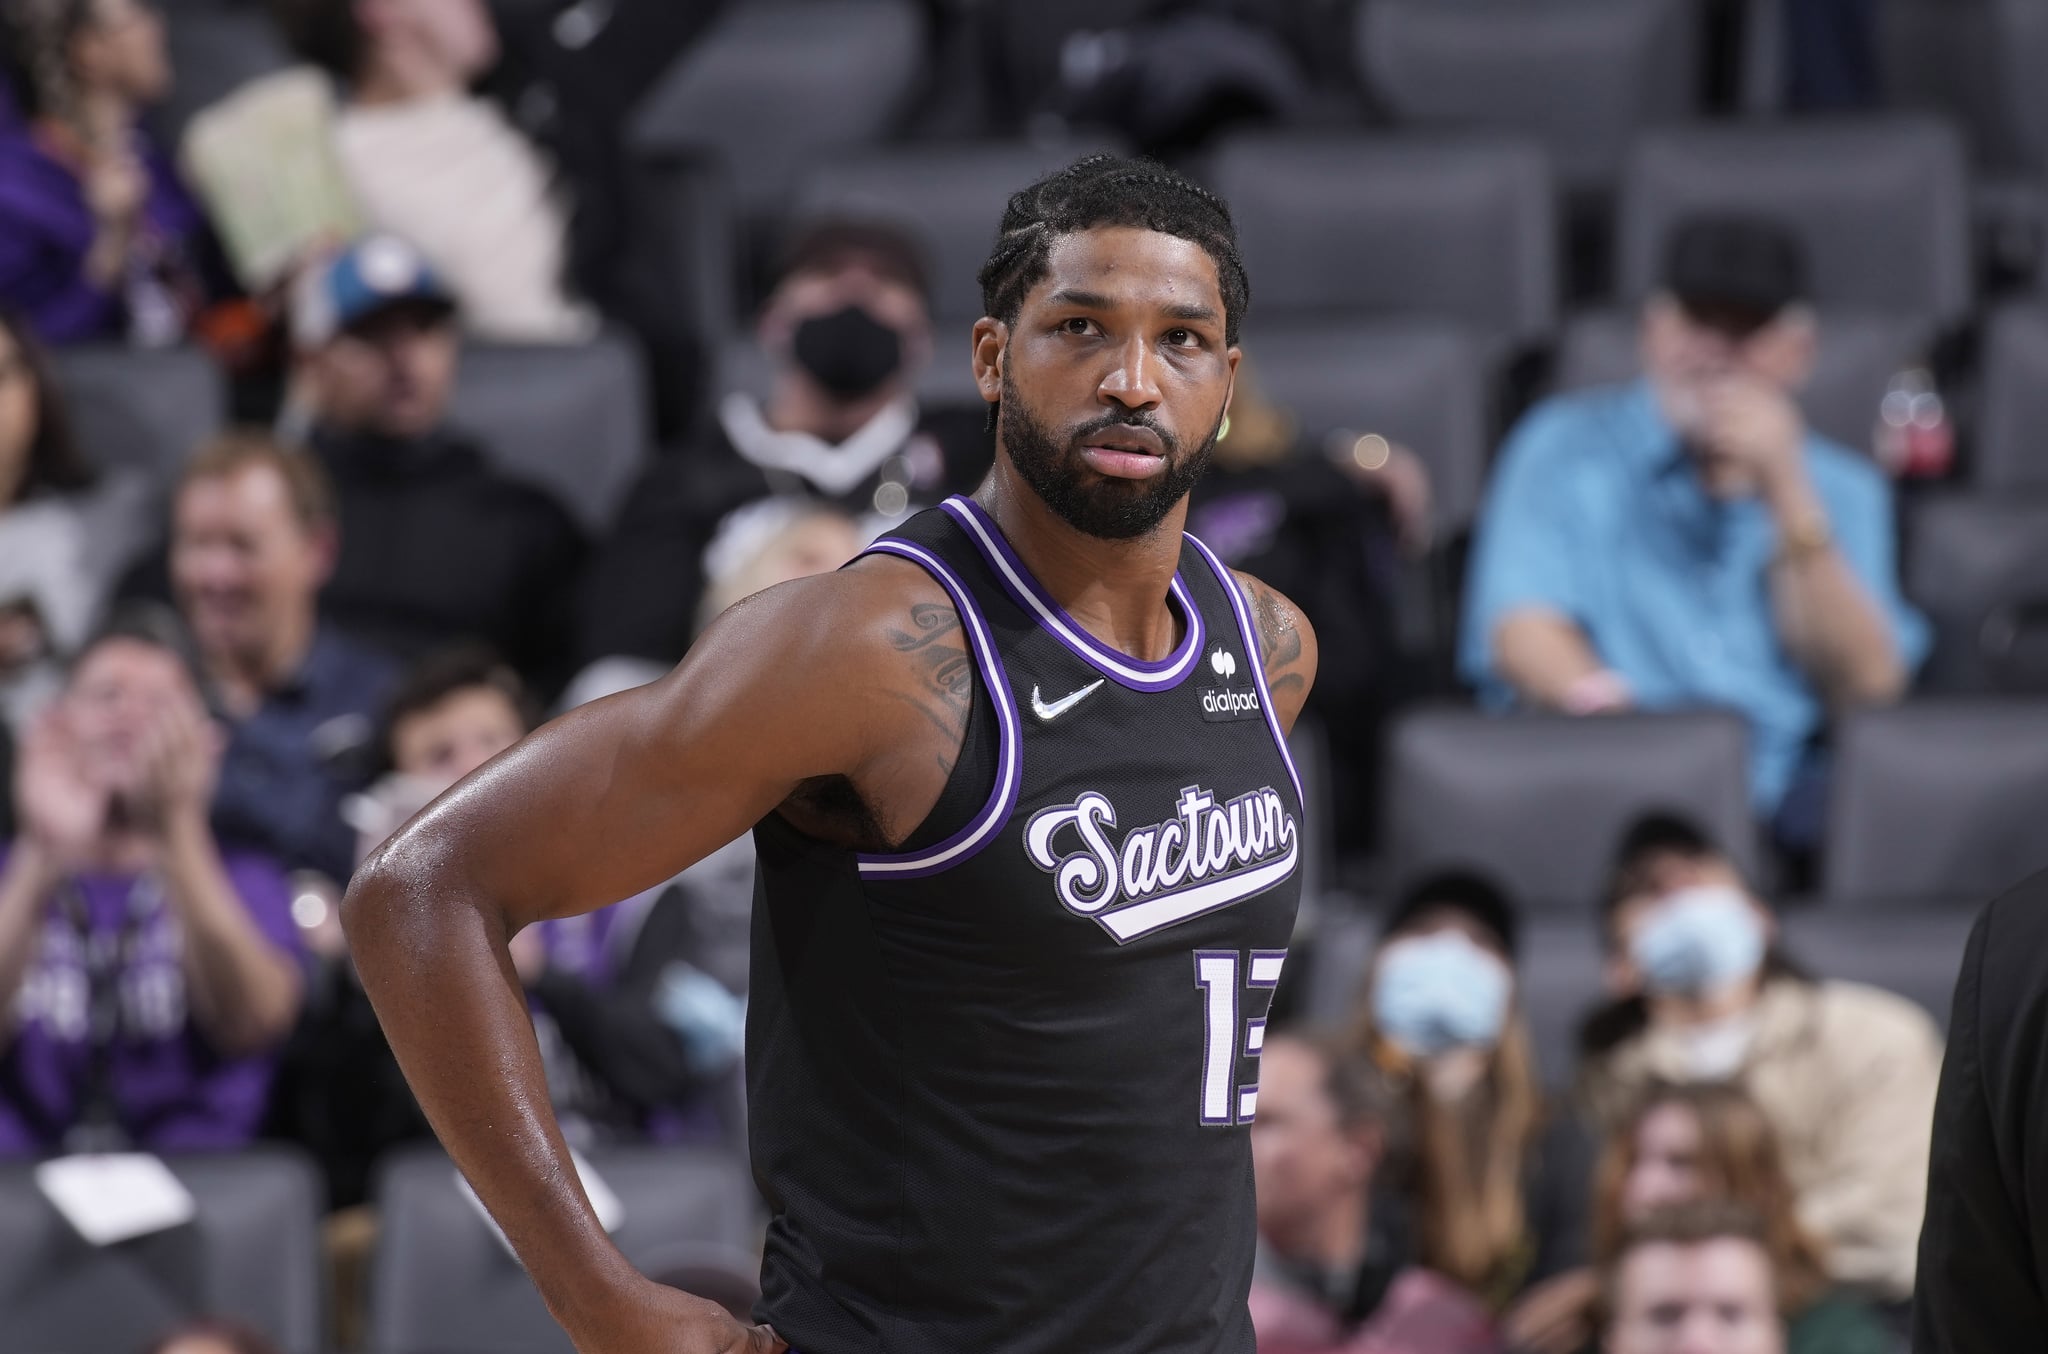 SACRAMENTO, CA - DECEMBER 17: Tristan Thompson #13 of the Sacramento Kings looks on during the game against the Memphis Grizzlies on December 17, 2021 at Golden 1 Center in Sacramento, California. NOTE TO USER: User expressly acknowledges and agrees that, by downloading and or using this photograph, User is consenting to the terms and conditions of the Getty Images Agreement. Mandatory Copyright Notice: Copyright 2021 NBAE (Photo by Rocky Widner/NBAE via Getty Images)